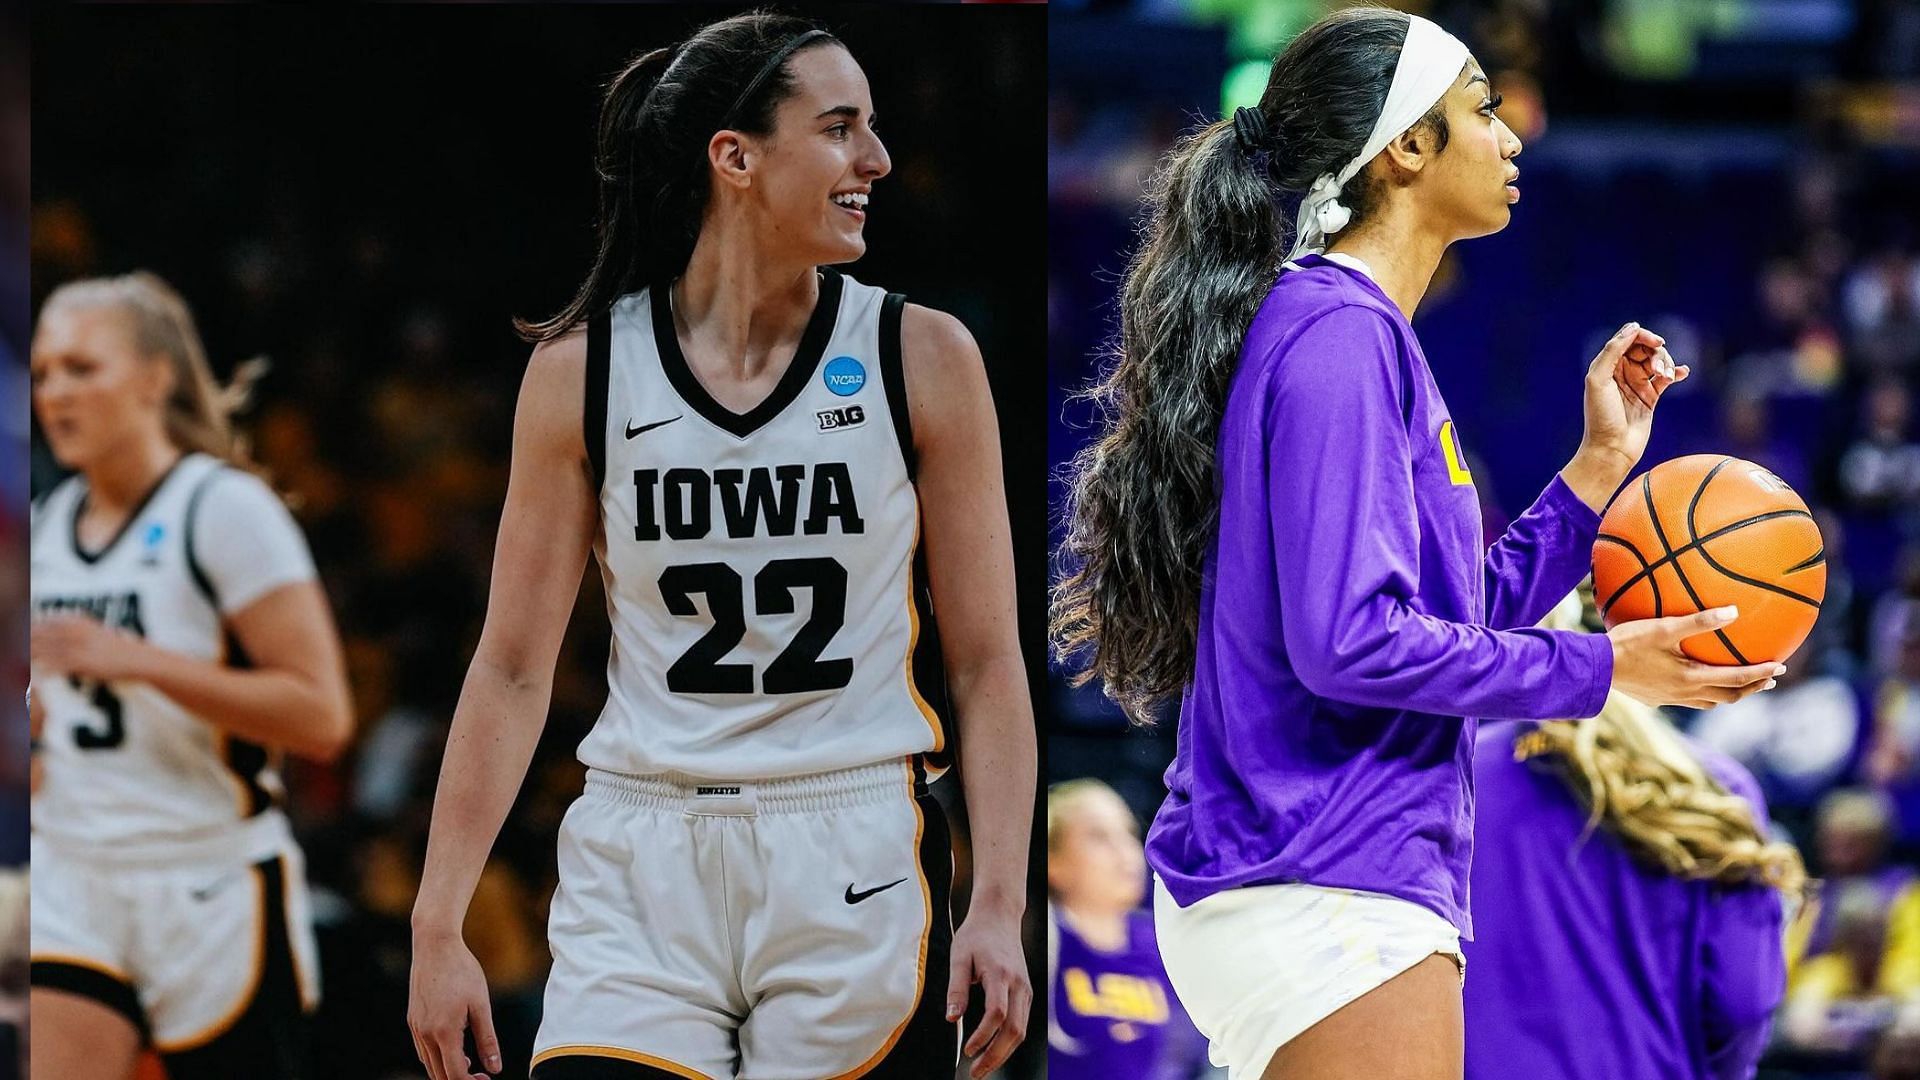 Caitlin Clark is headed to the Final Four on the back of 12 million viewers for her last game